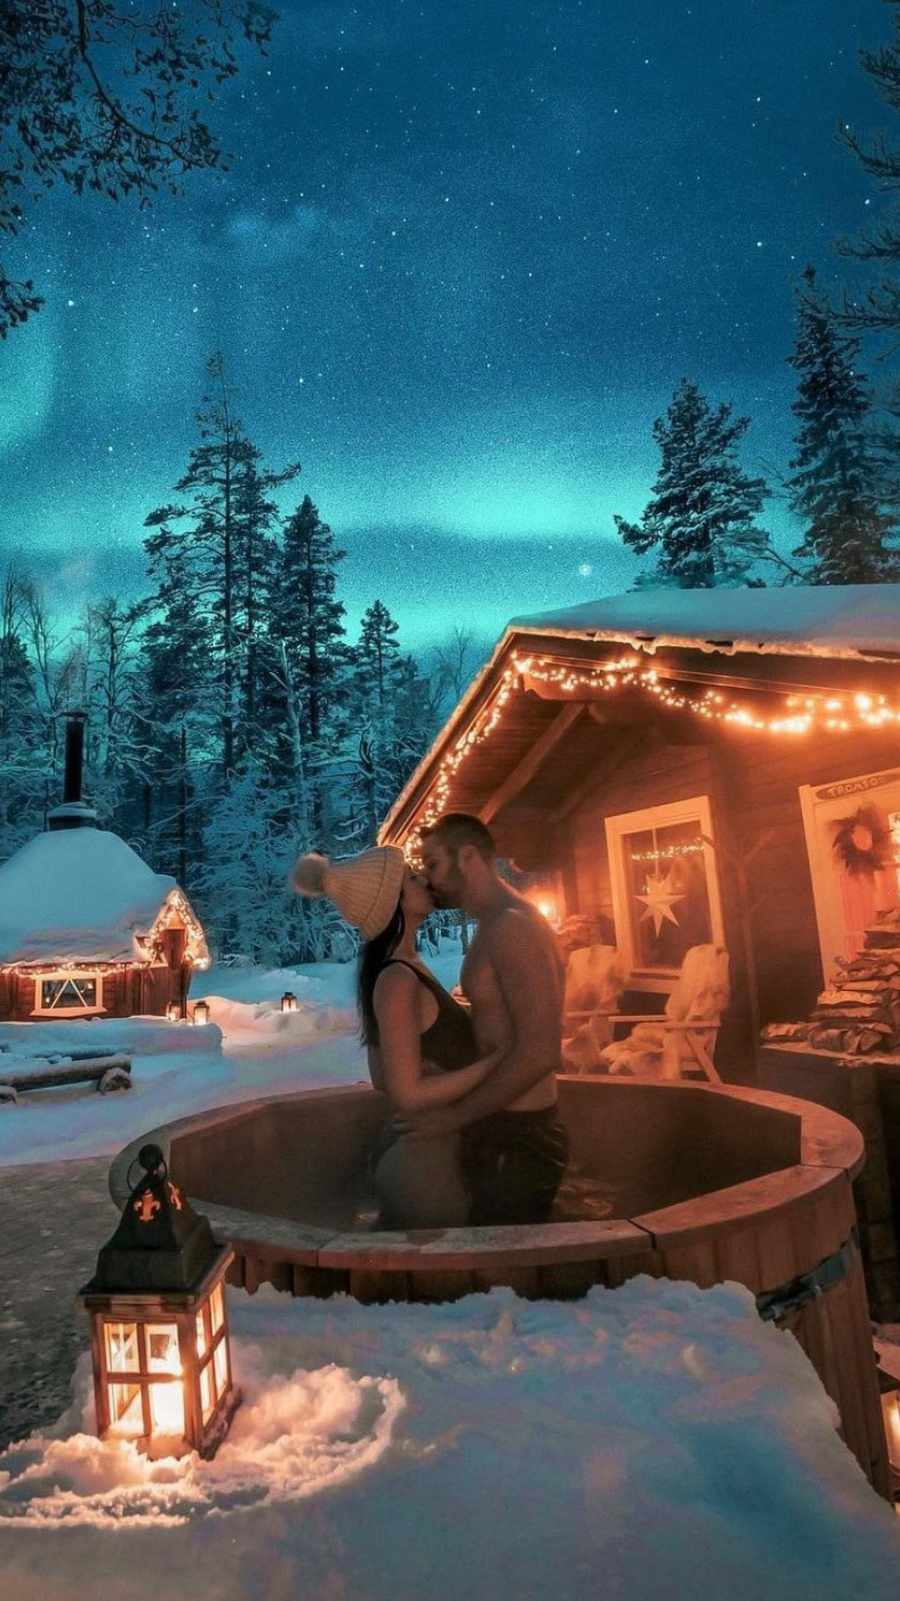 Christmas Vacation with Girlfriend Wallpaper